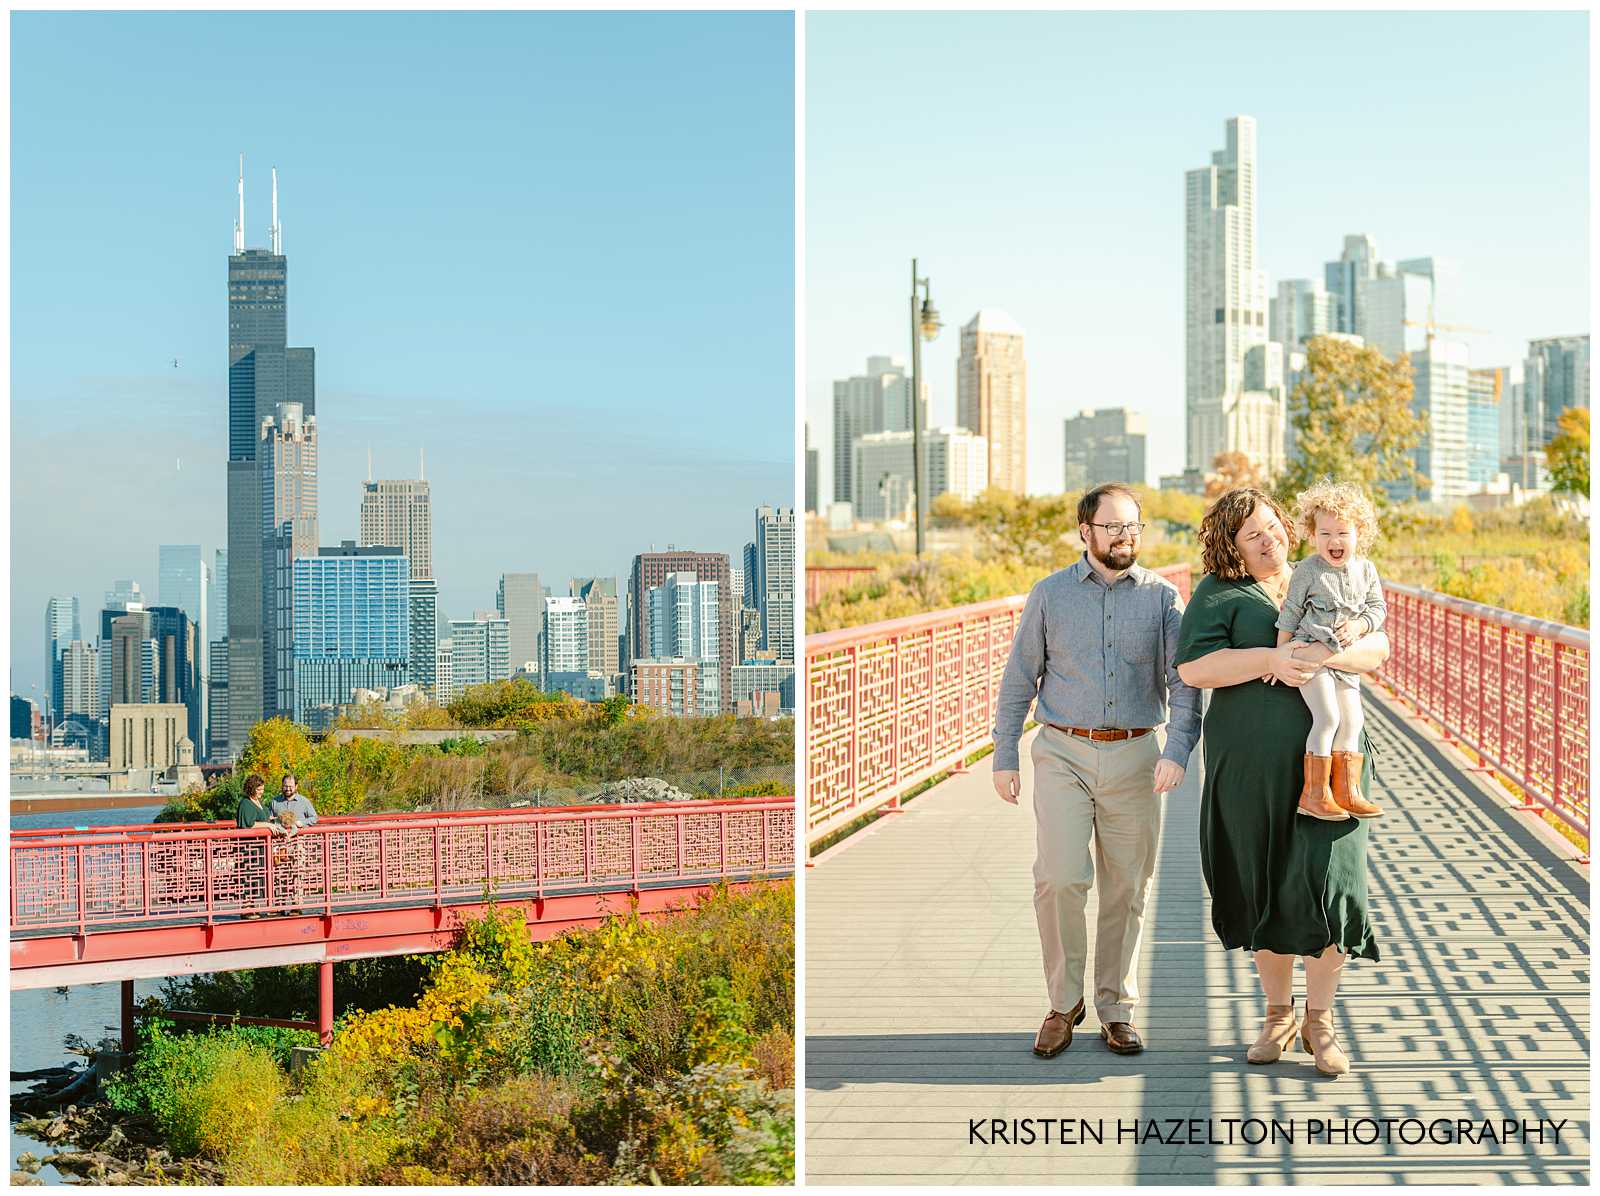 Family photos at Chicago's Ping Tom Memorial Park with the Hancock tower and city skyline in the background